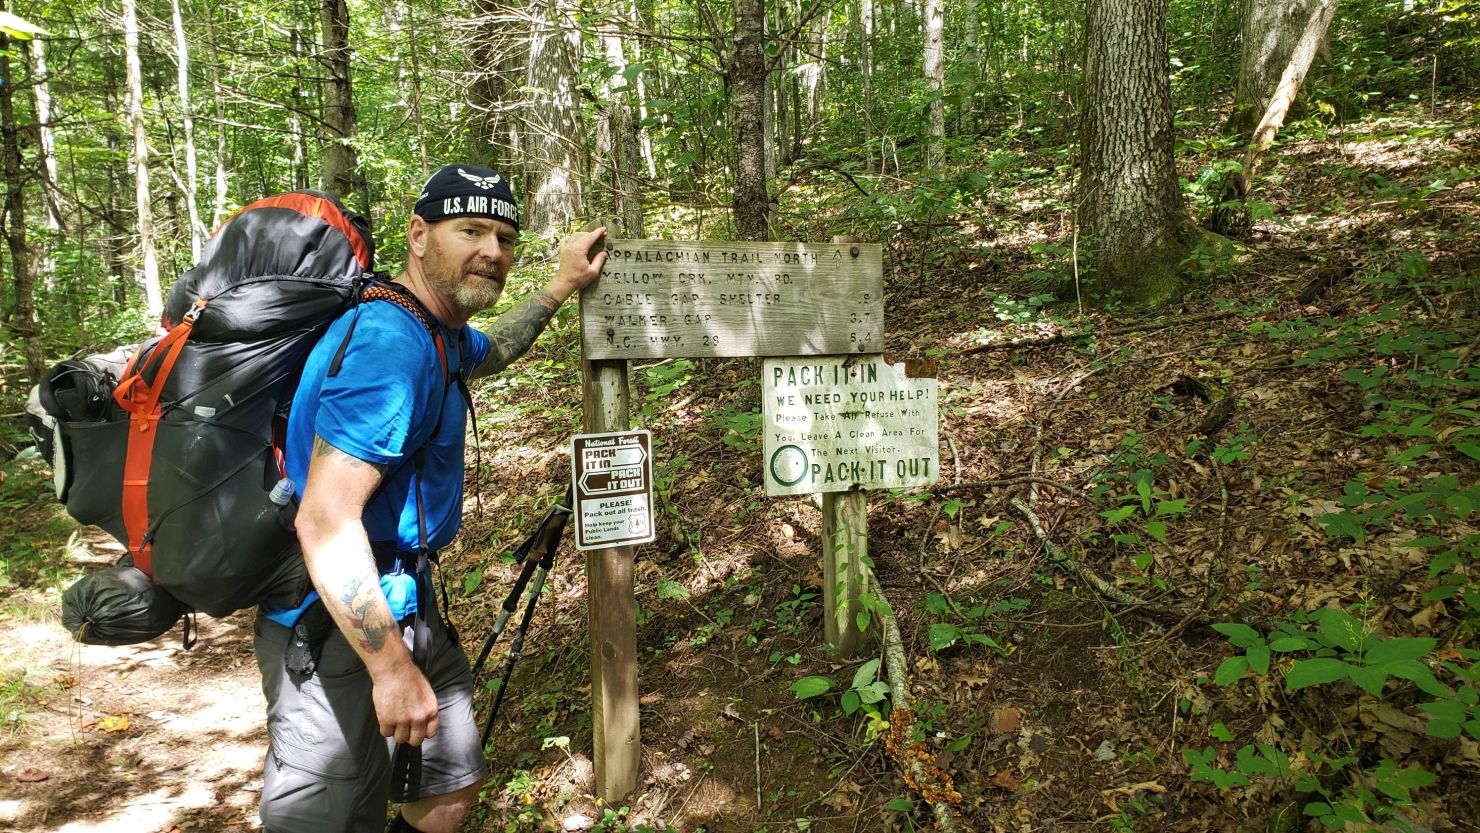 Dan Schoenthal says he hopes to complete the Appalachian Trail by late July or early August.